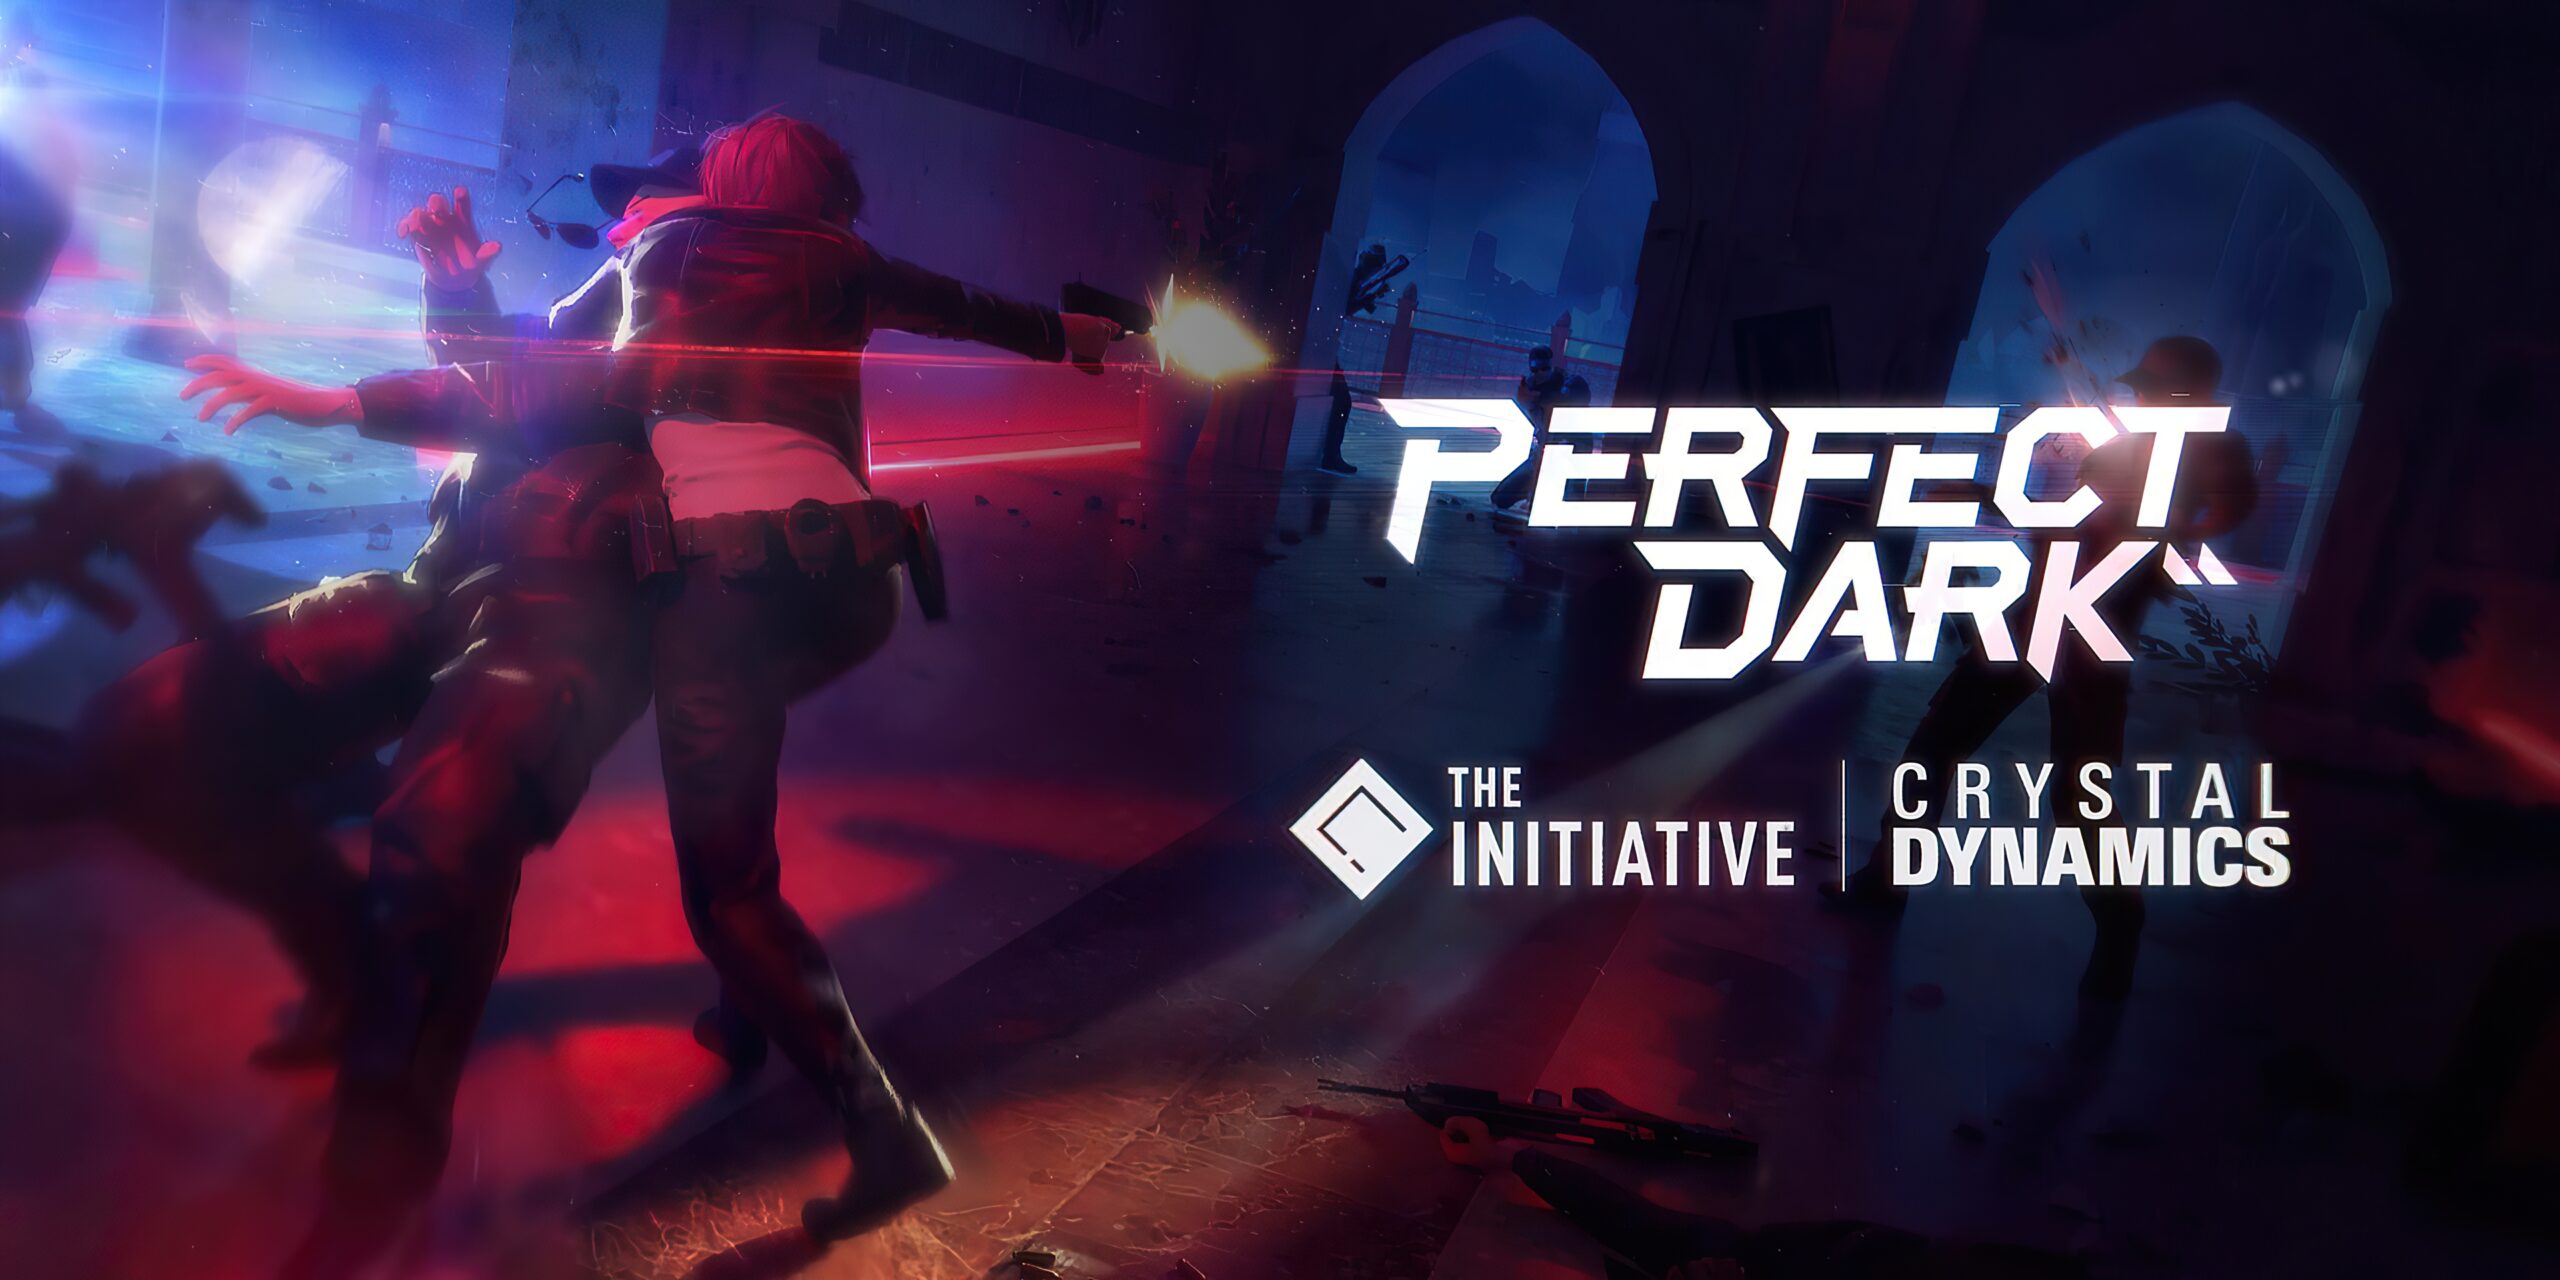 ledig stilling Regnjakke kubiske Perfect Dark Development is “Going Extremely Well” – Crystal Dynamics and  Eidos Montreal CEO